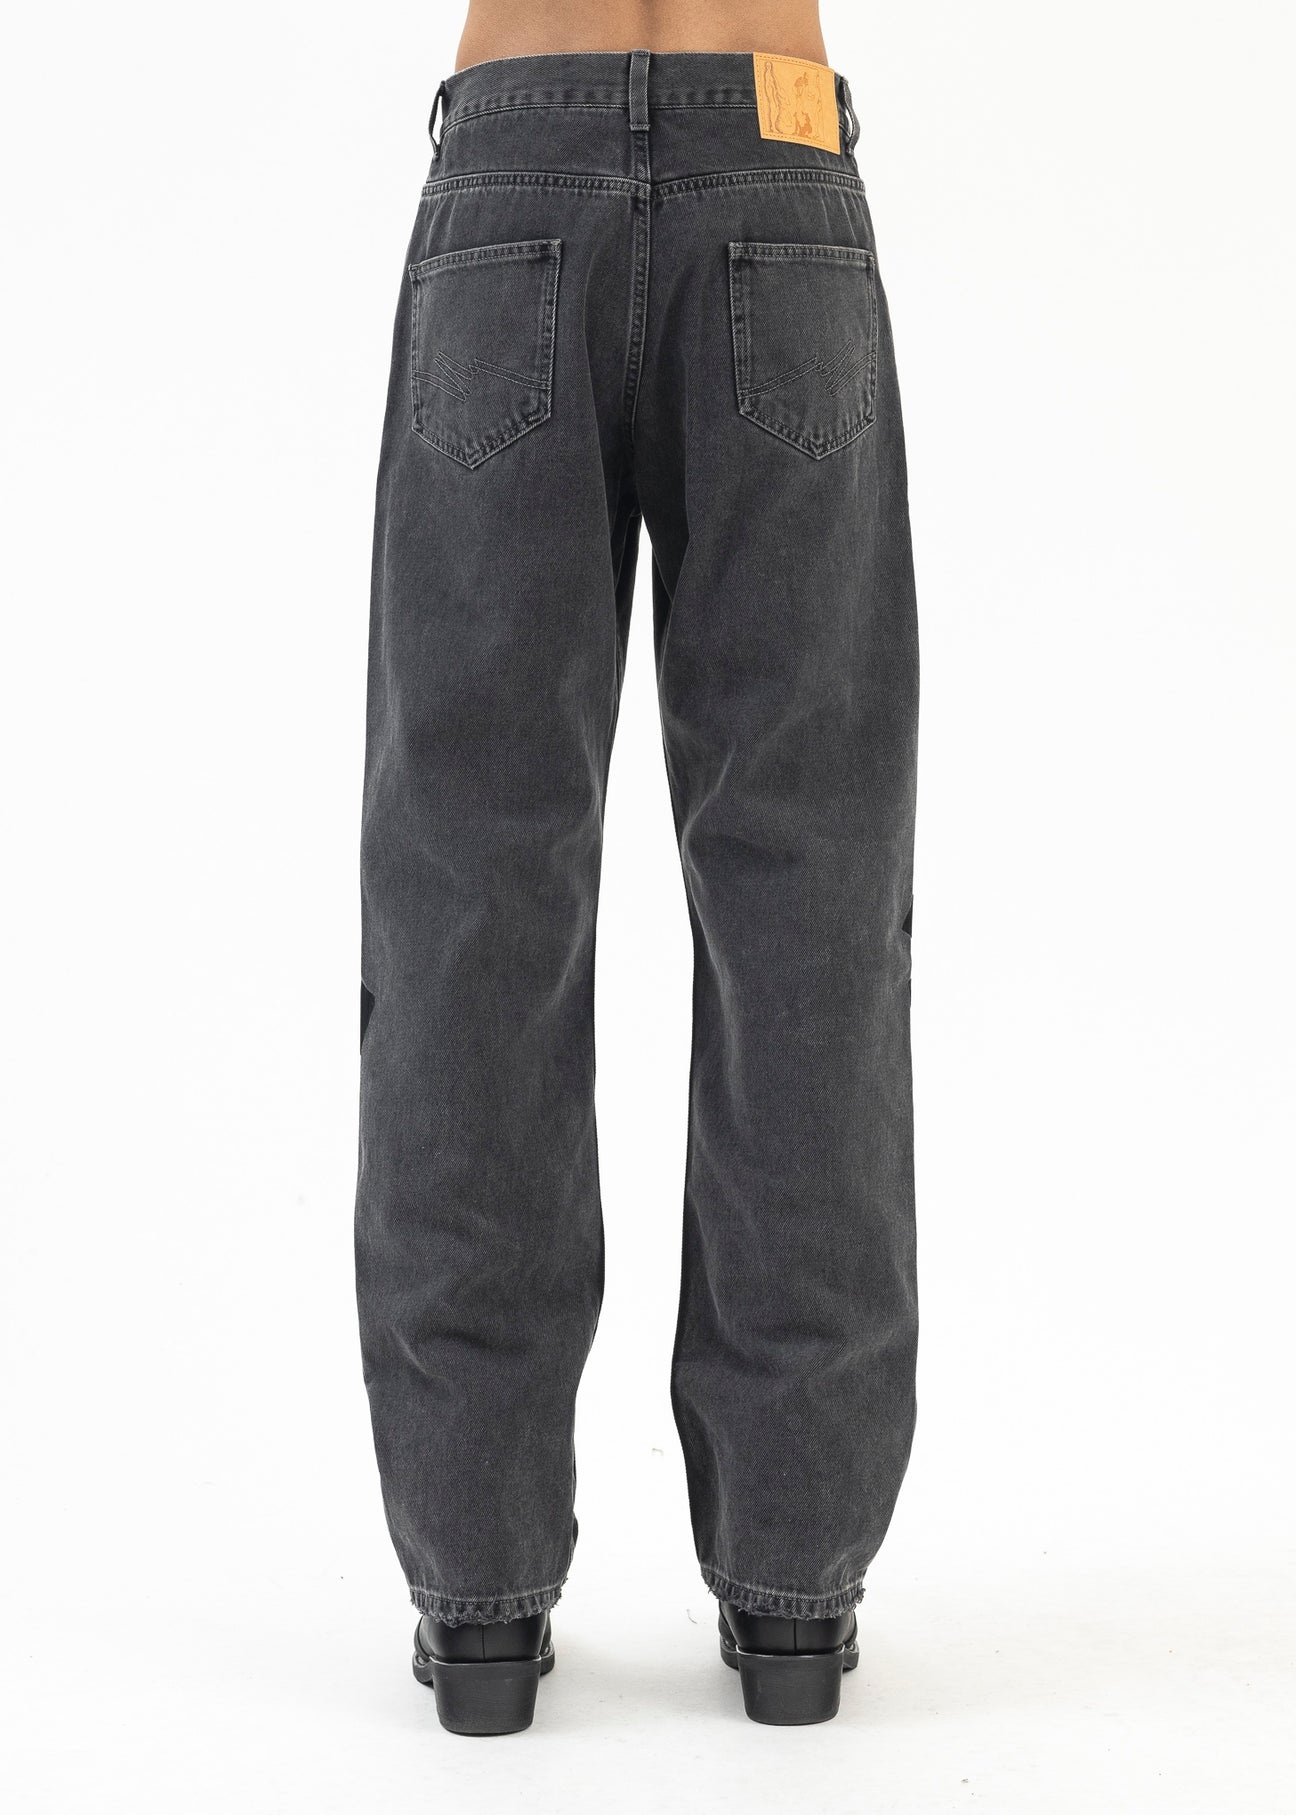 BLACK WASH / GAFFER TAPE RELAXED FIT JEAN - 4